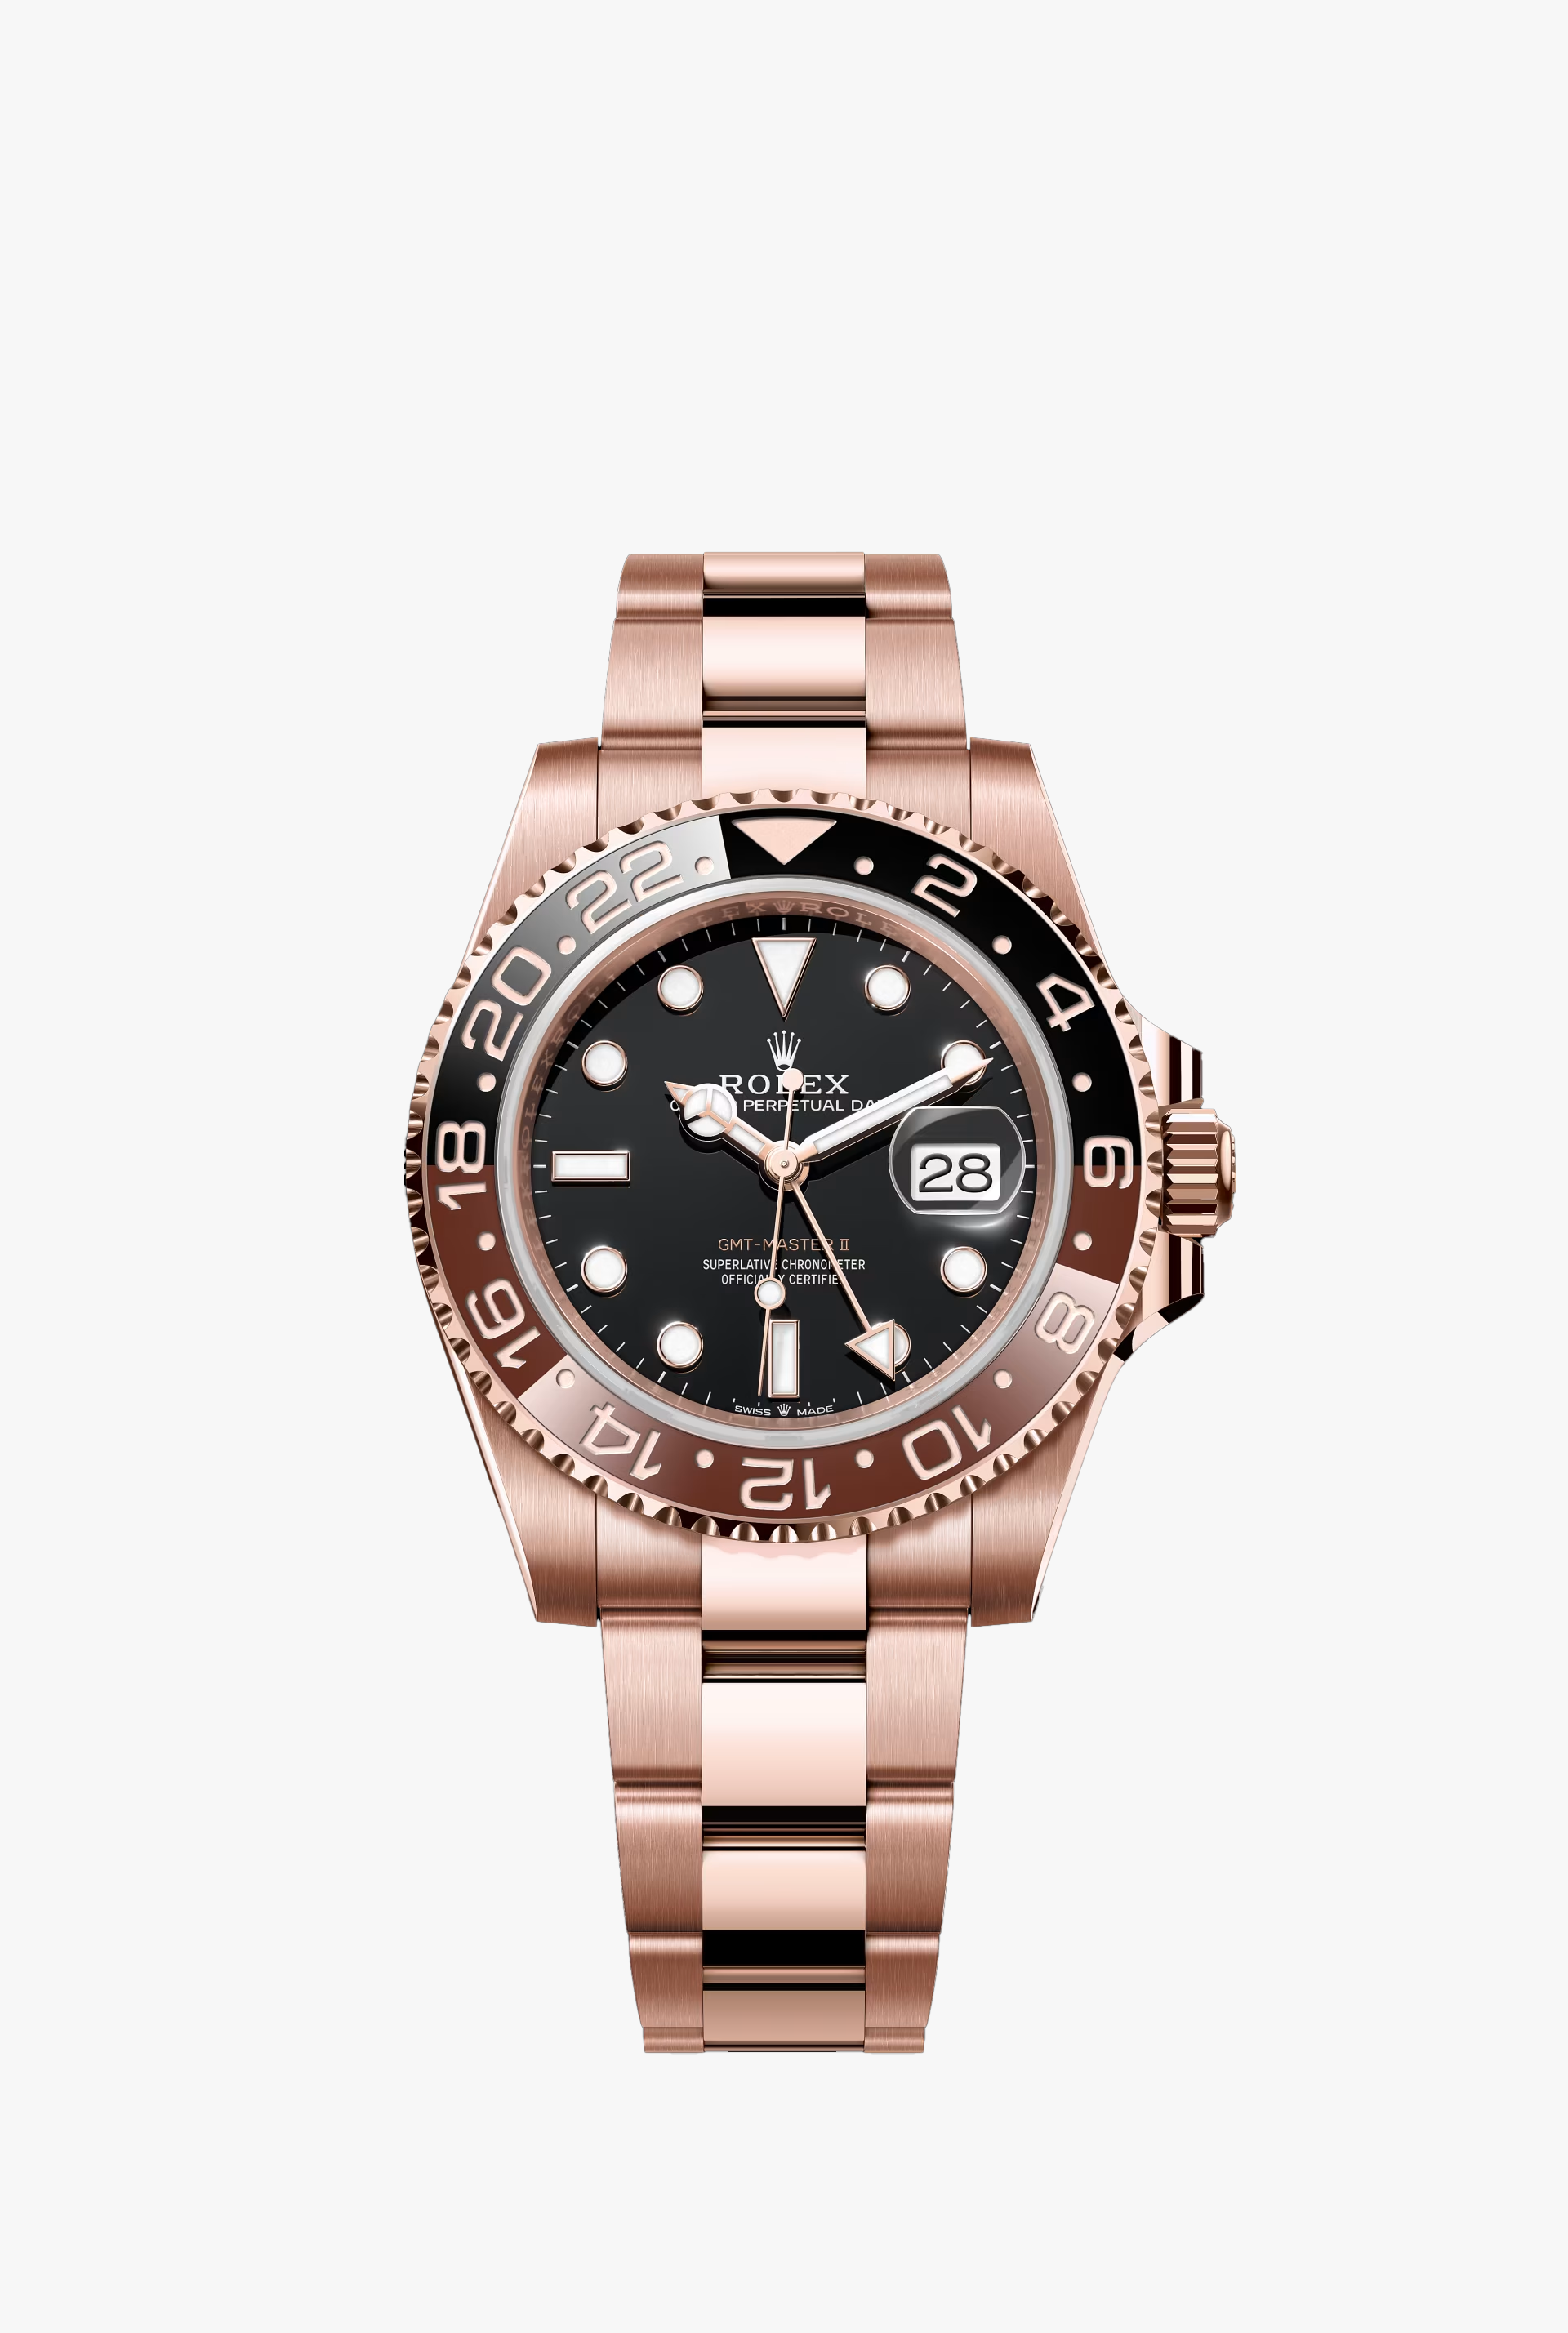 Rolex GMT-Master l Oyster,40 mm, Everose gold Reference 126715CHNR